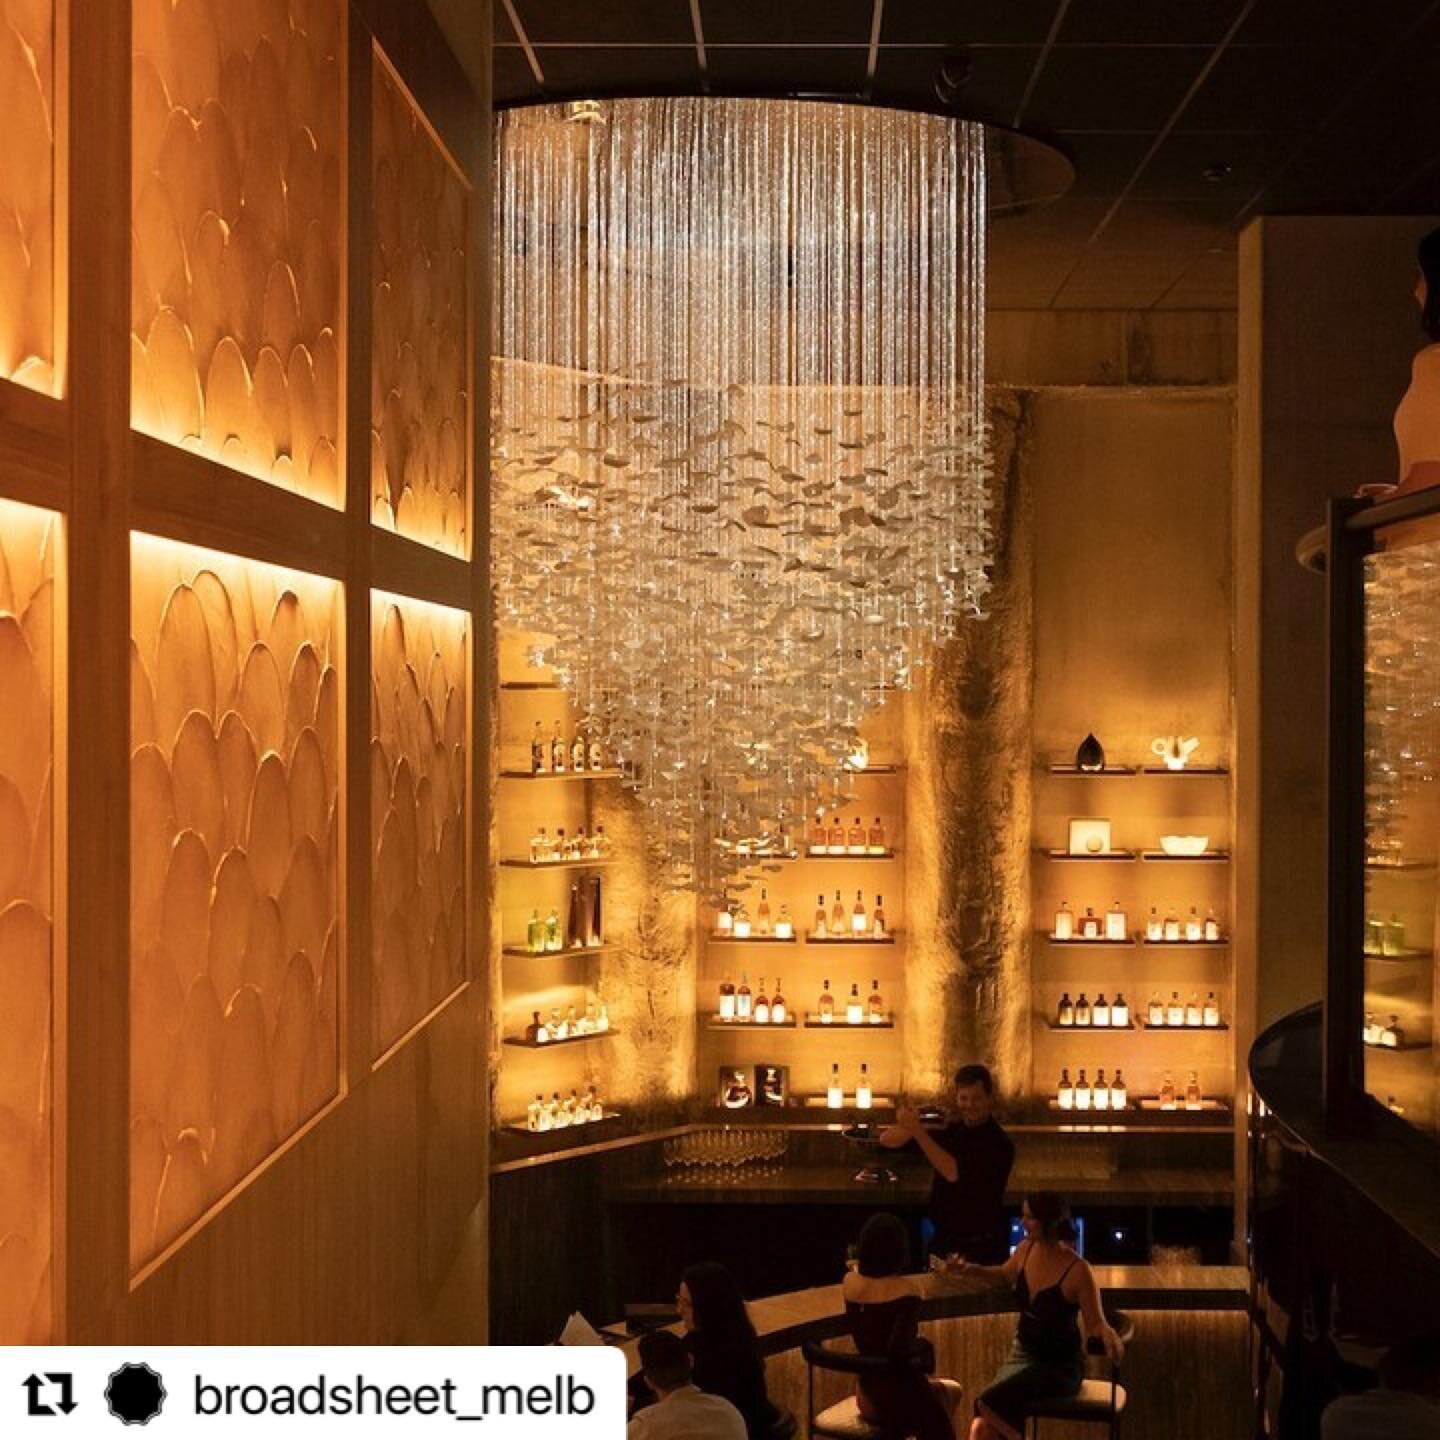 #Repost @broadsheet_melb with @use.repost
・・・
There&rsquo;s something very Hollywood about the Yugen experience &ndash; entering a curtained-off street-level tea bar, gliding below ground in a glass-walled elevator, stepping out into the golden glow 